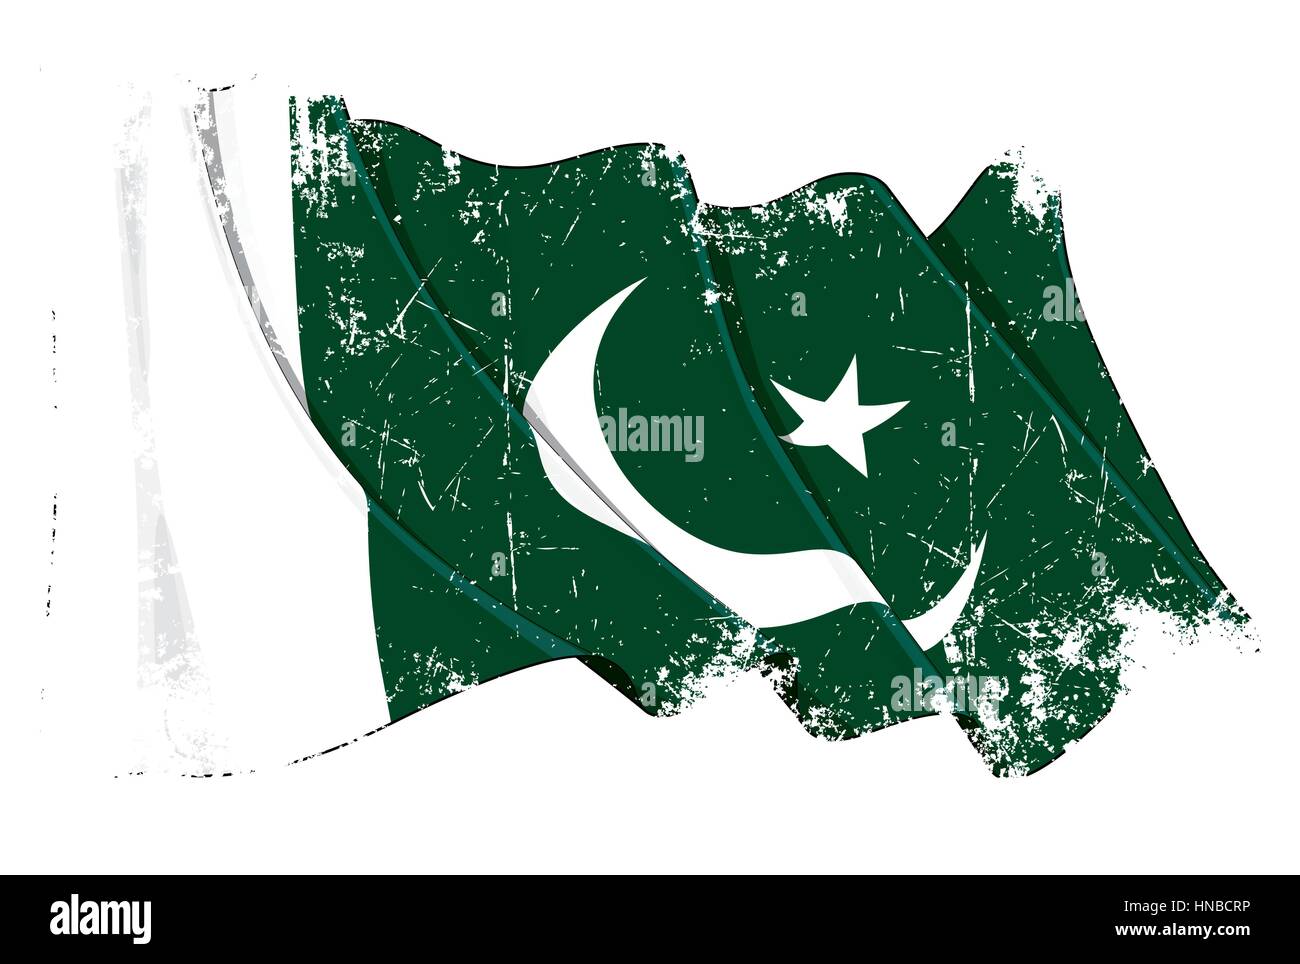 Grunge Vector Illustration of a Waving Pakistani Flag. All elements neatly organized. Texture, Lines, Shading & Flag Colors on separate layers for eas Stock Vector